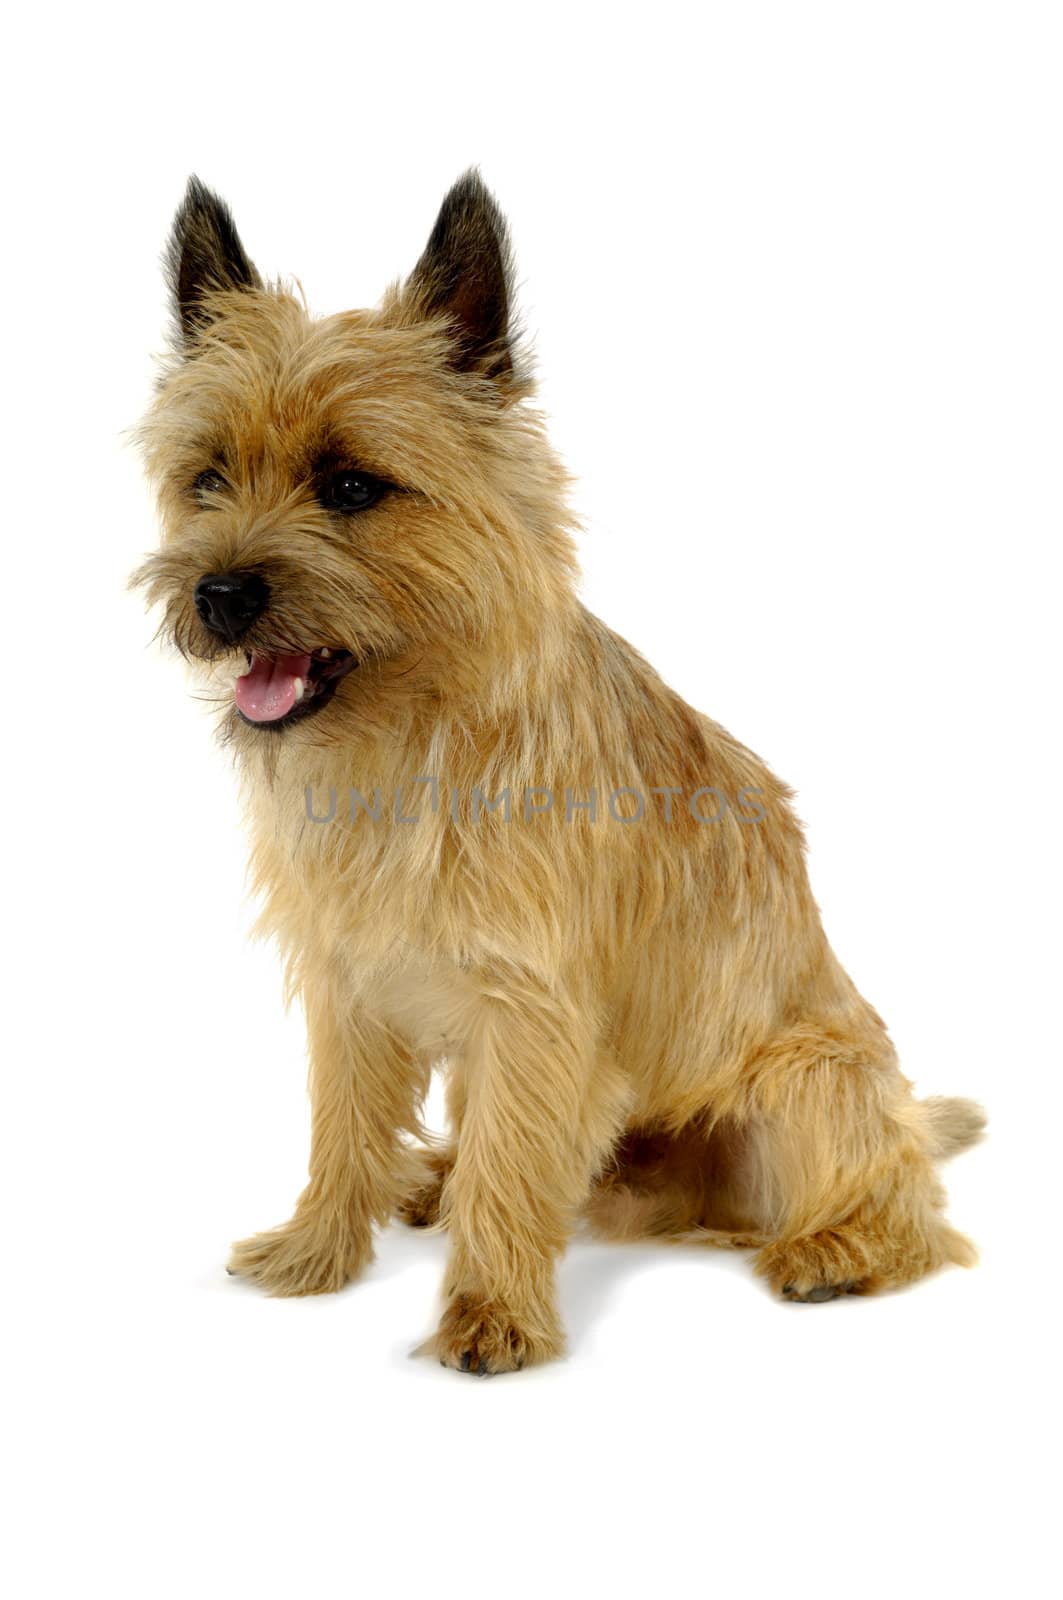 Sweet sad dog is sitting on a white background. The breed of the dog is a Cairn Terrier.